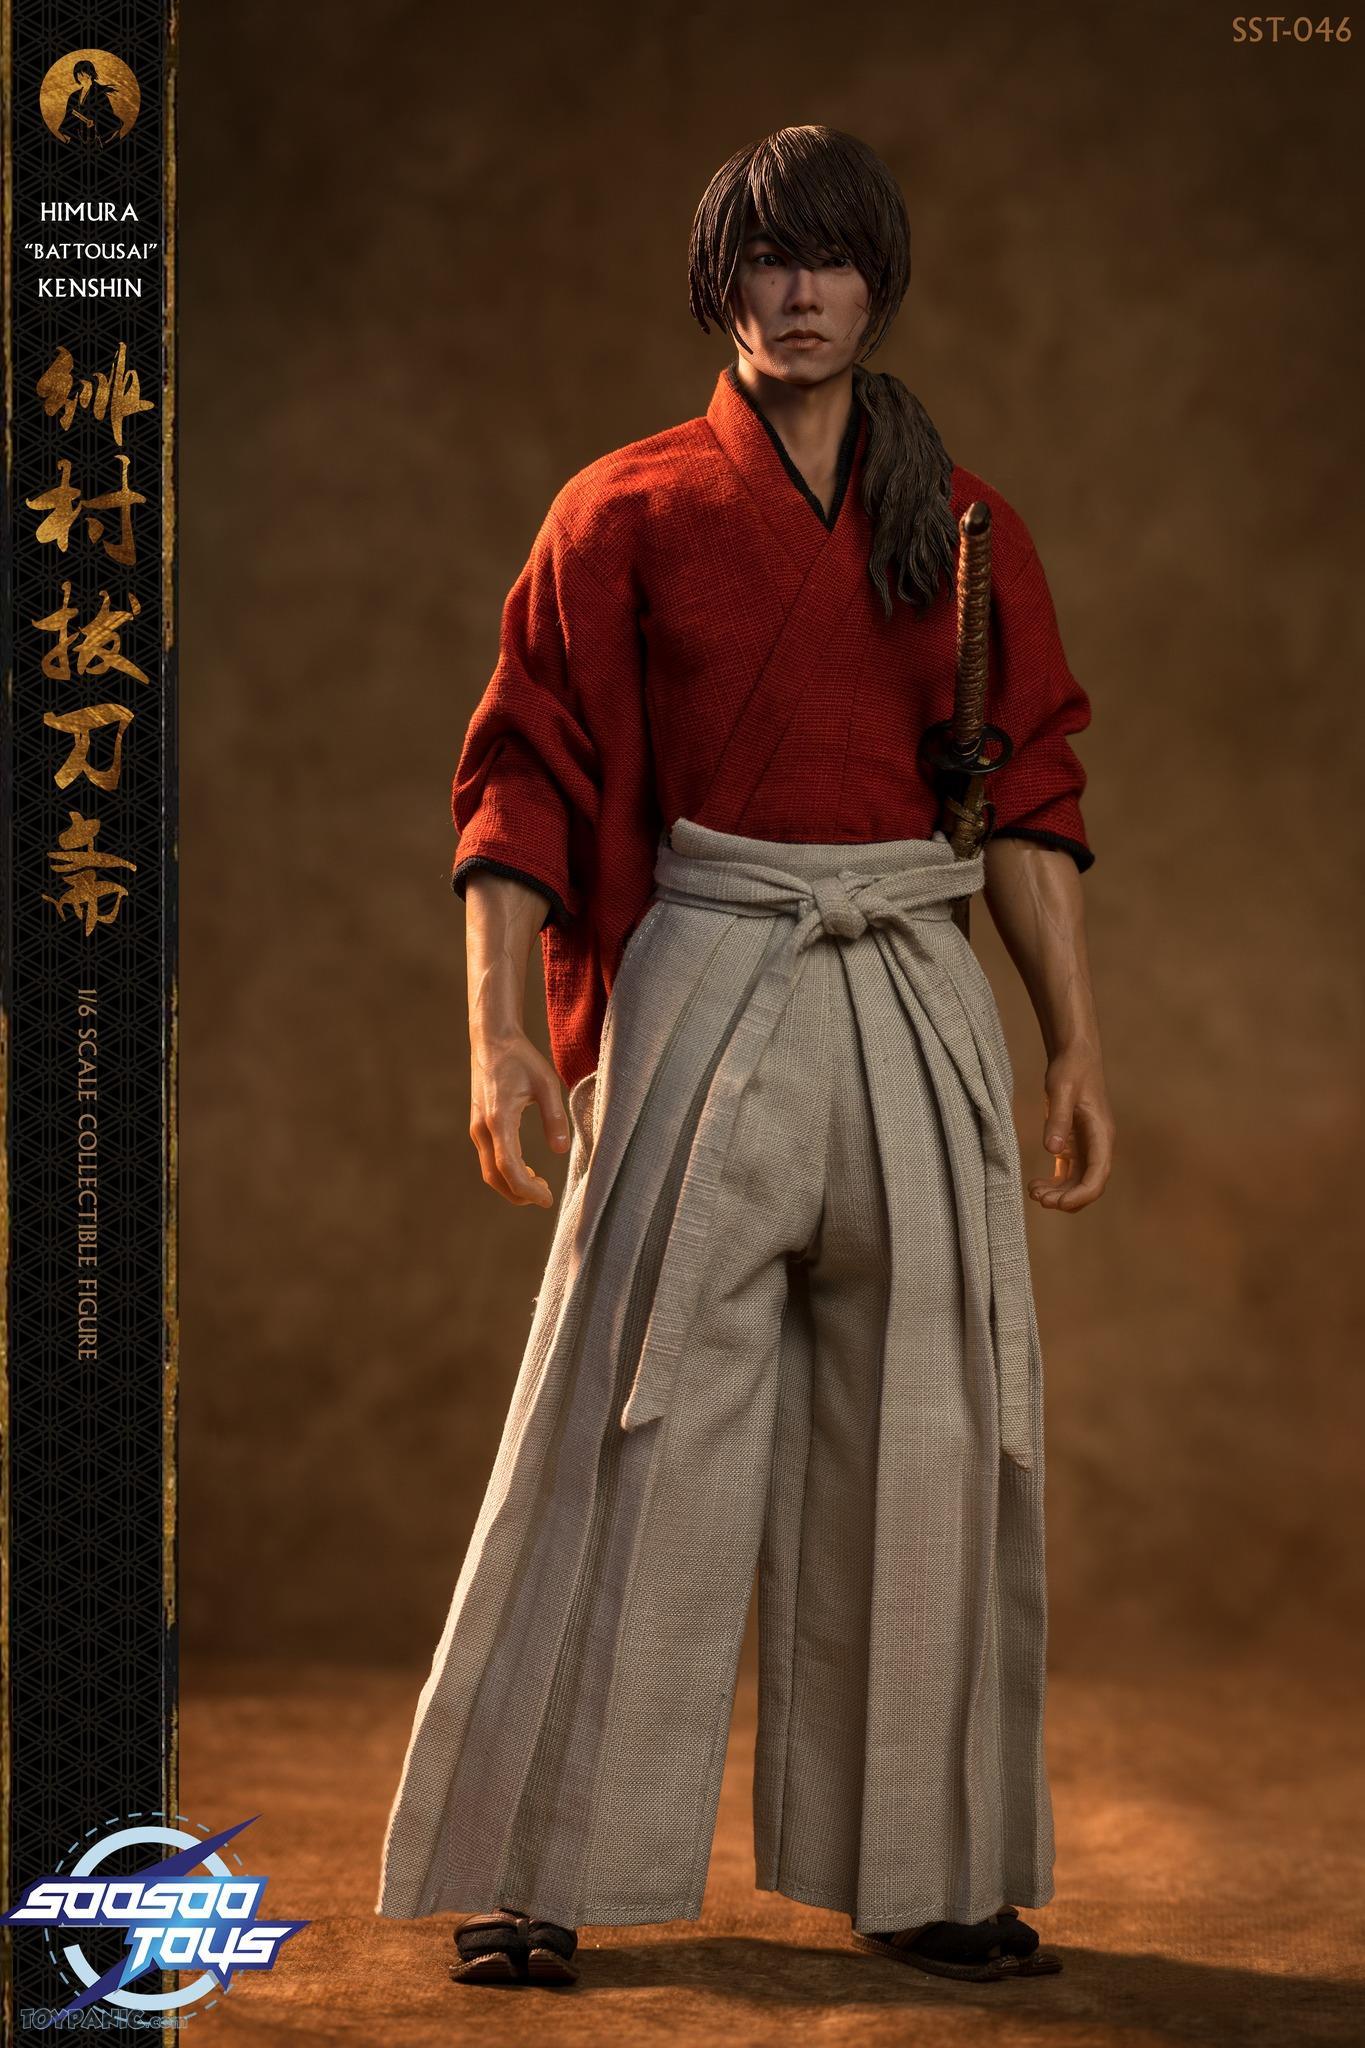 kenshin - NEW PRODUCT: 1/6 scale Rurouni Kenshin Collectible Figure from SooSooToys 712202251233PM_9426670